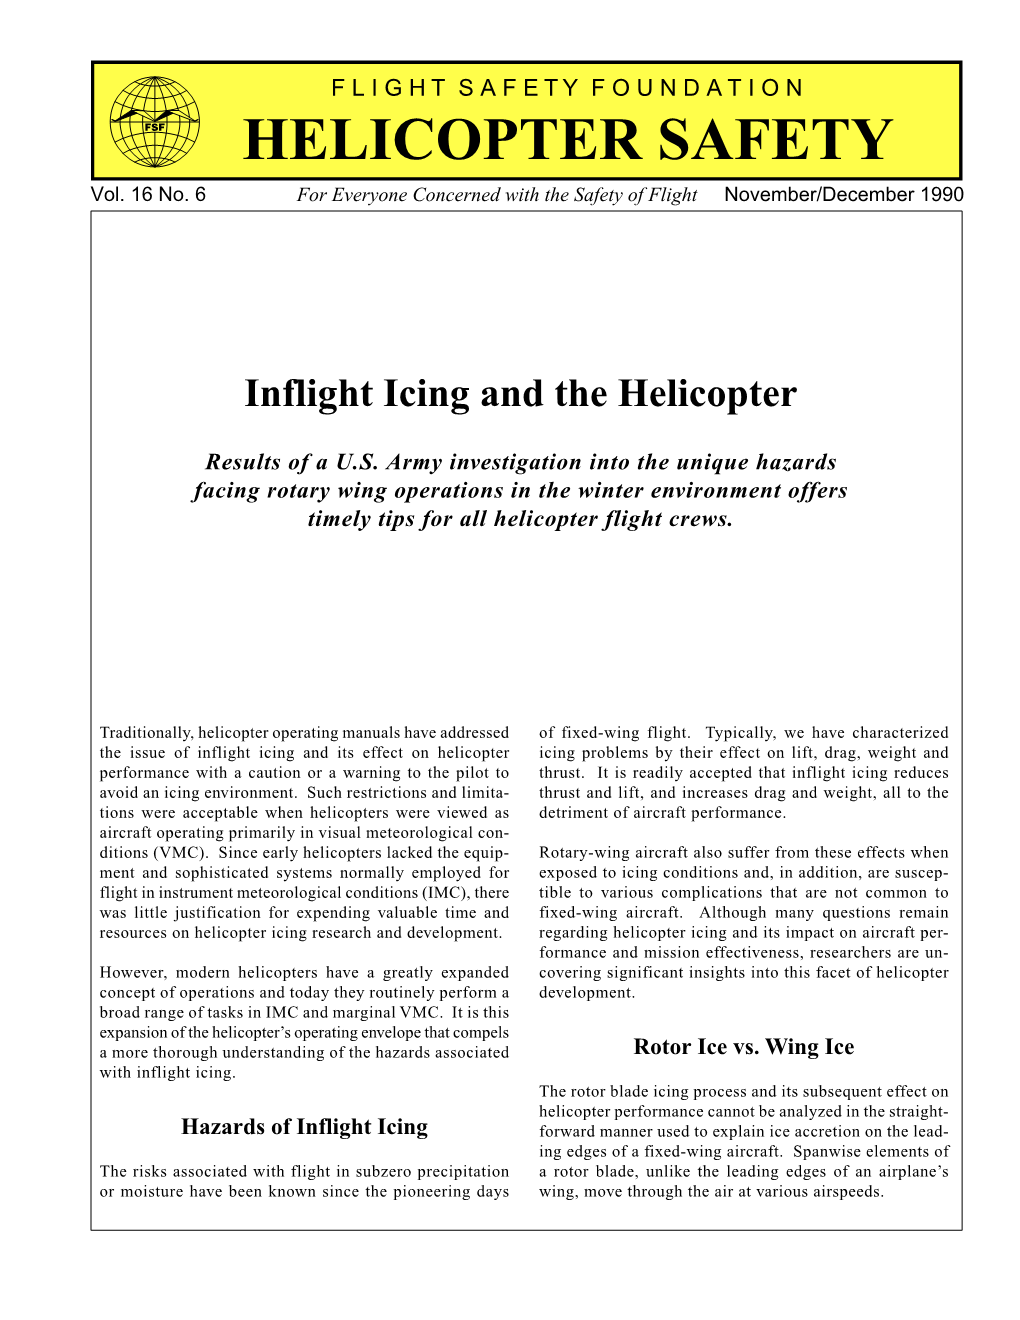 HELICOPTER SAFETY Vol